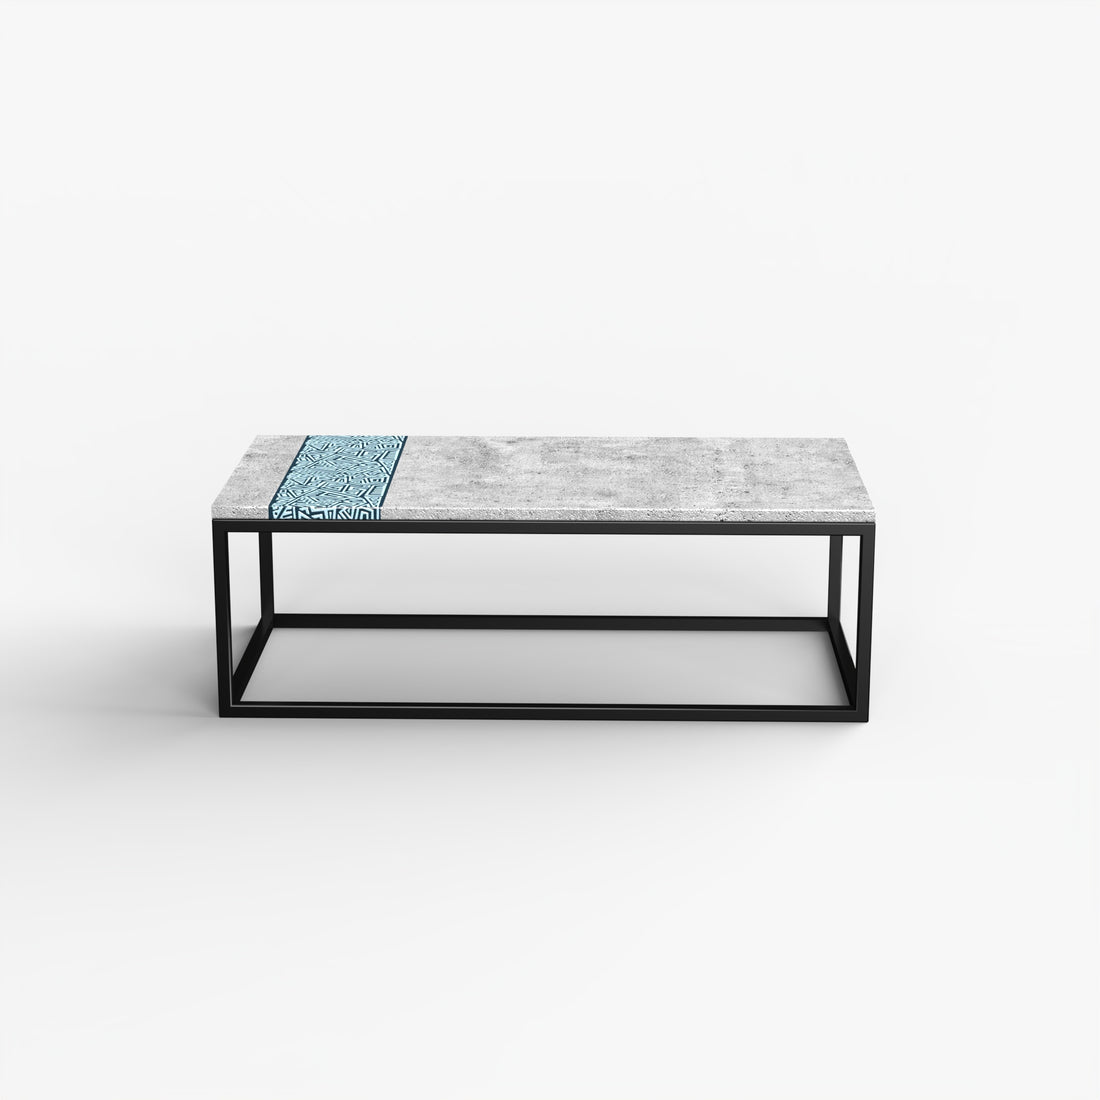 Isinmi Coffee Table - Patterned Concrete Home Office Garden | HOG-HomeOfficeGarden | HOG-Home.Office.Garden